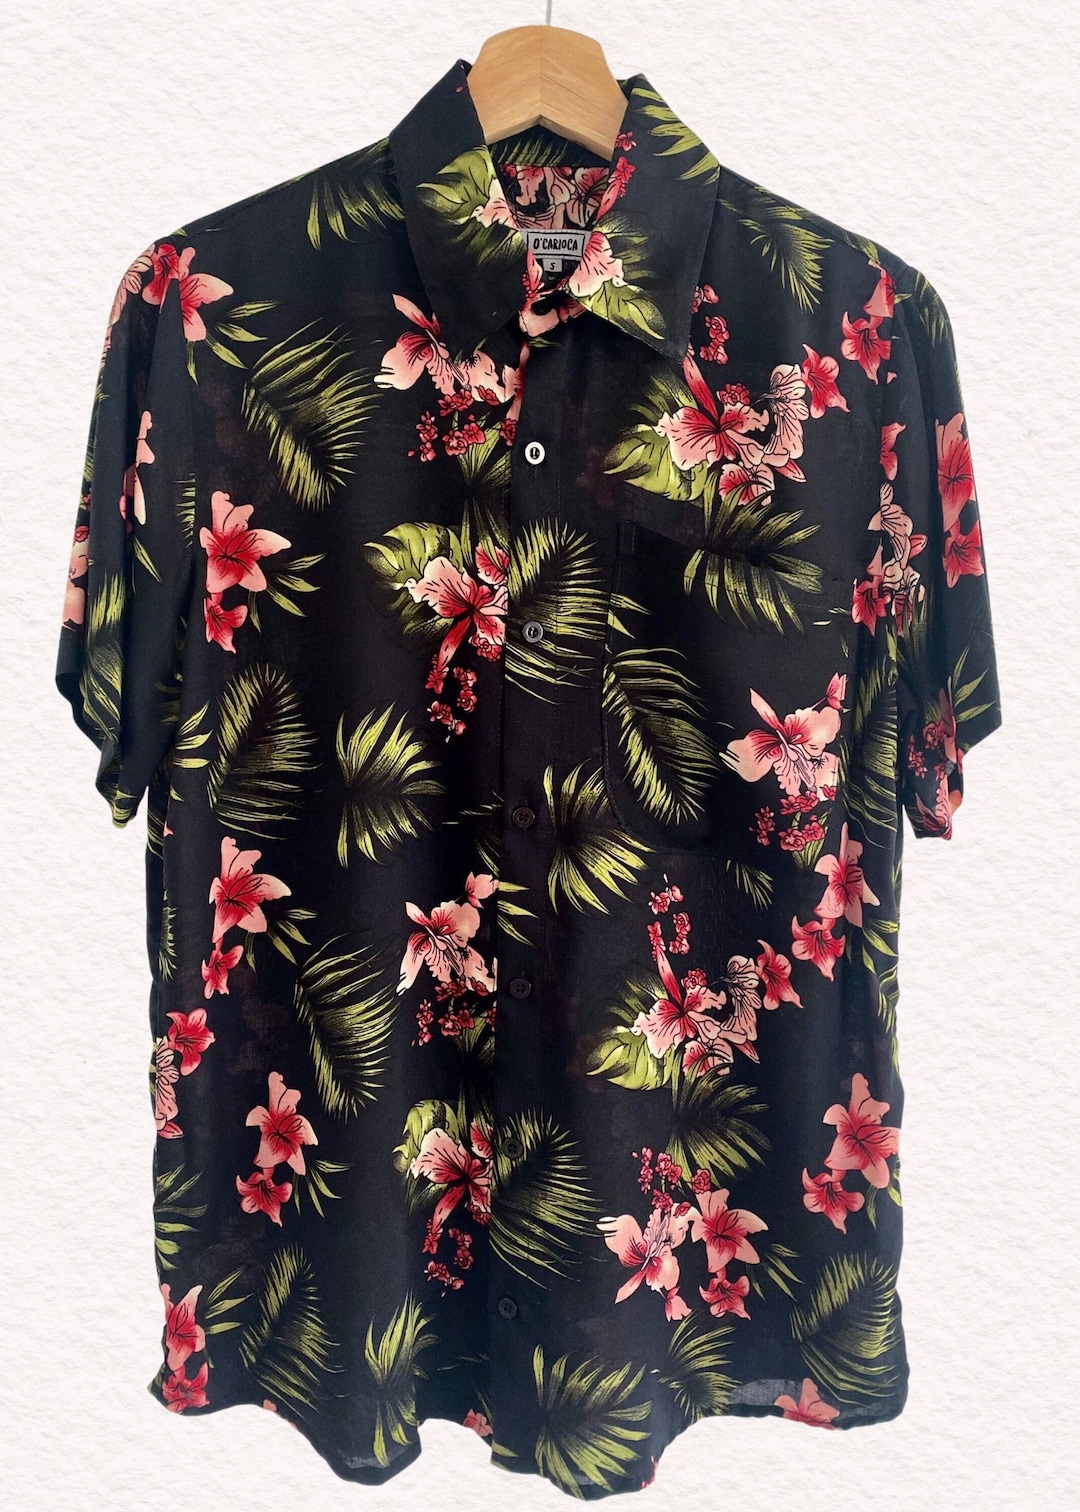 O'carioca Nicaragua Short Sleeve Button up Shirt With a Relaxed Fit. - Etsy